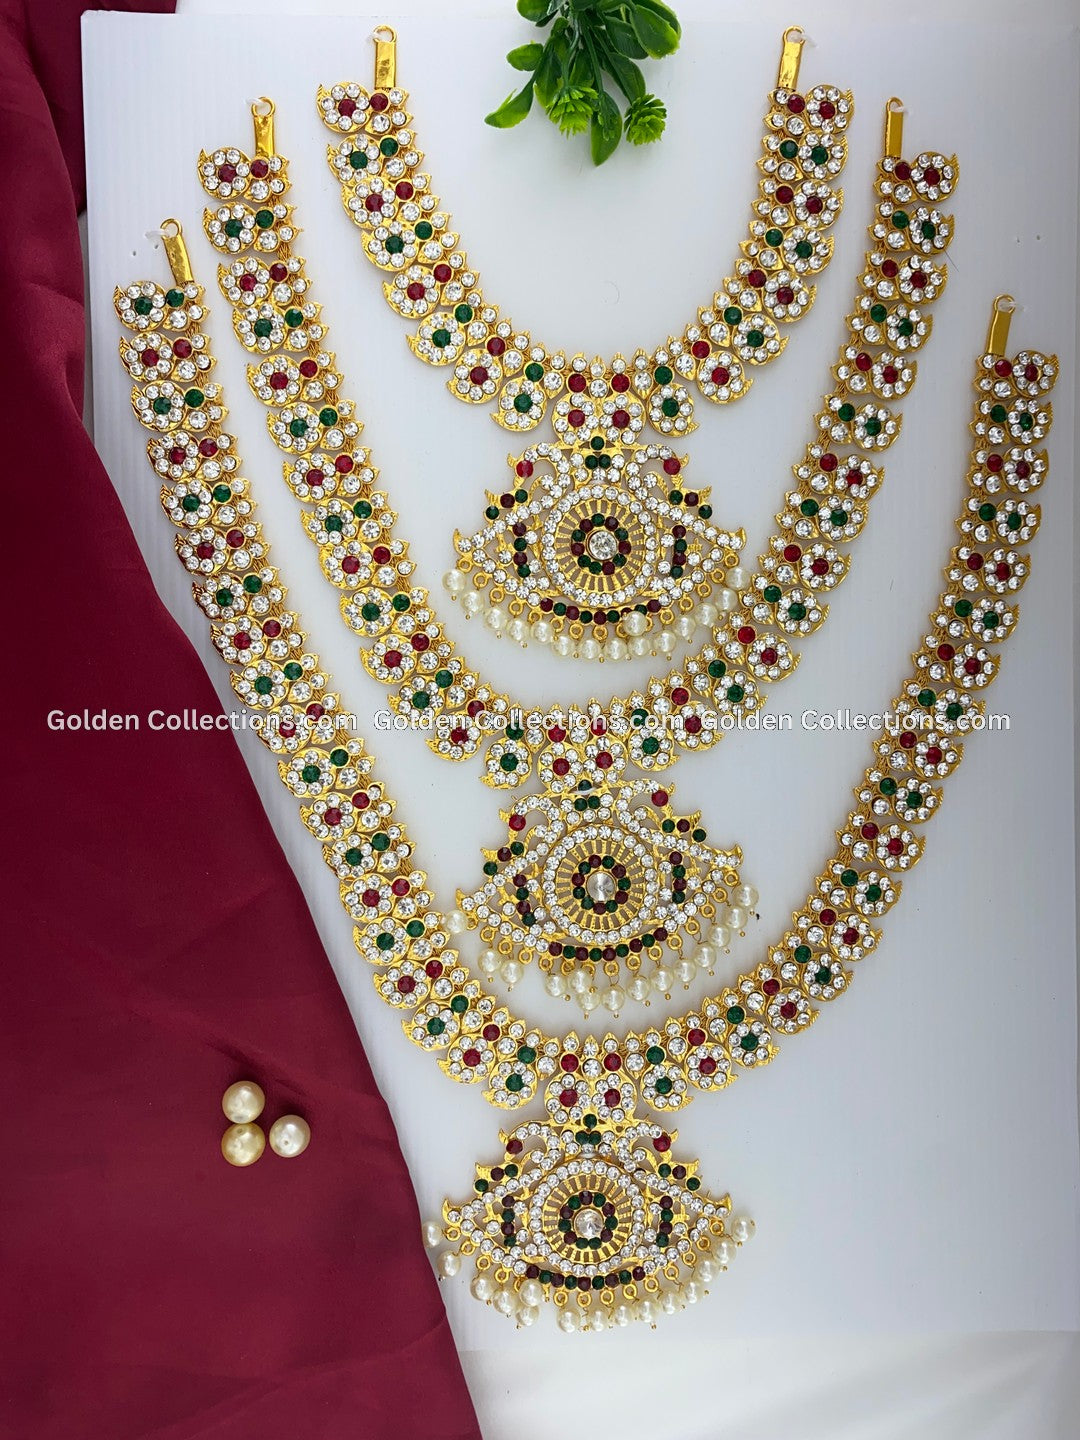 Explore Temple Deity Long Necklace-GoldenCollections